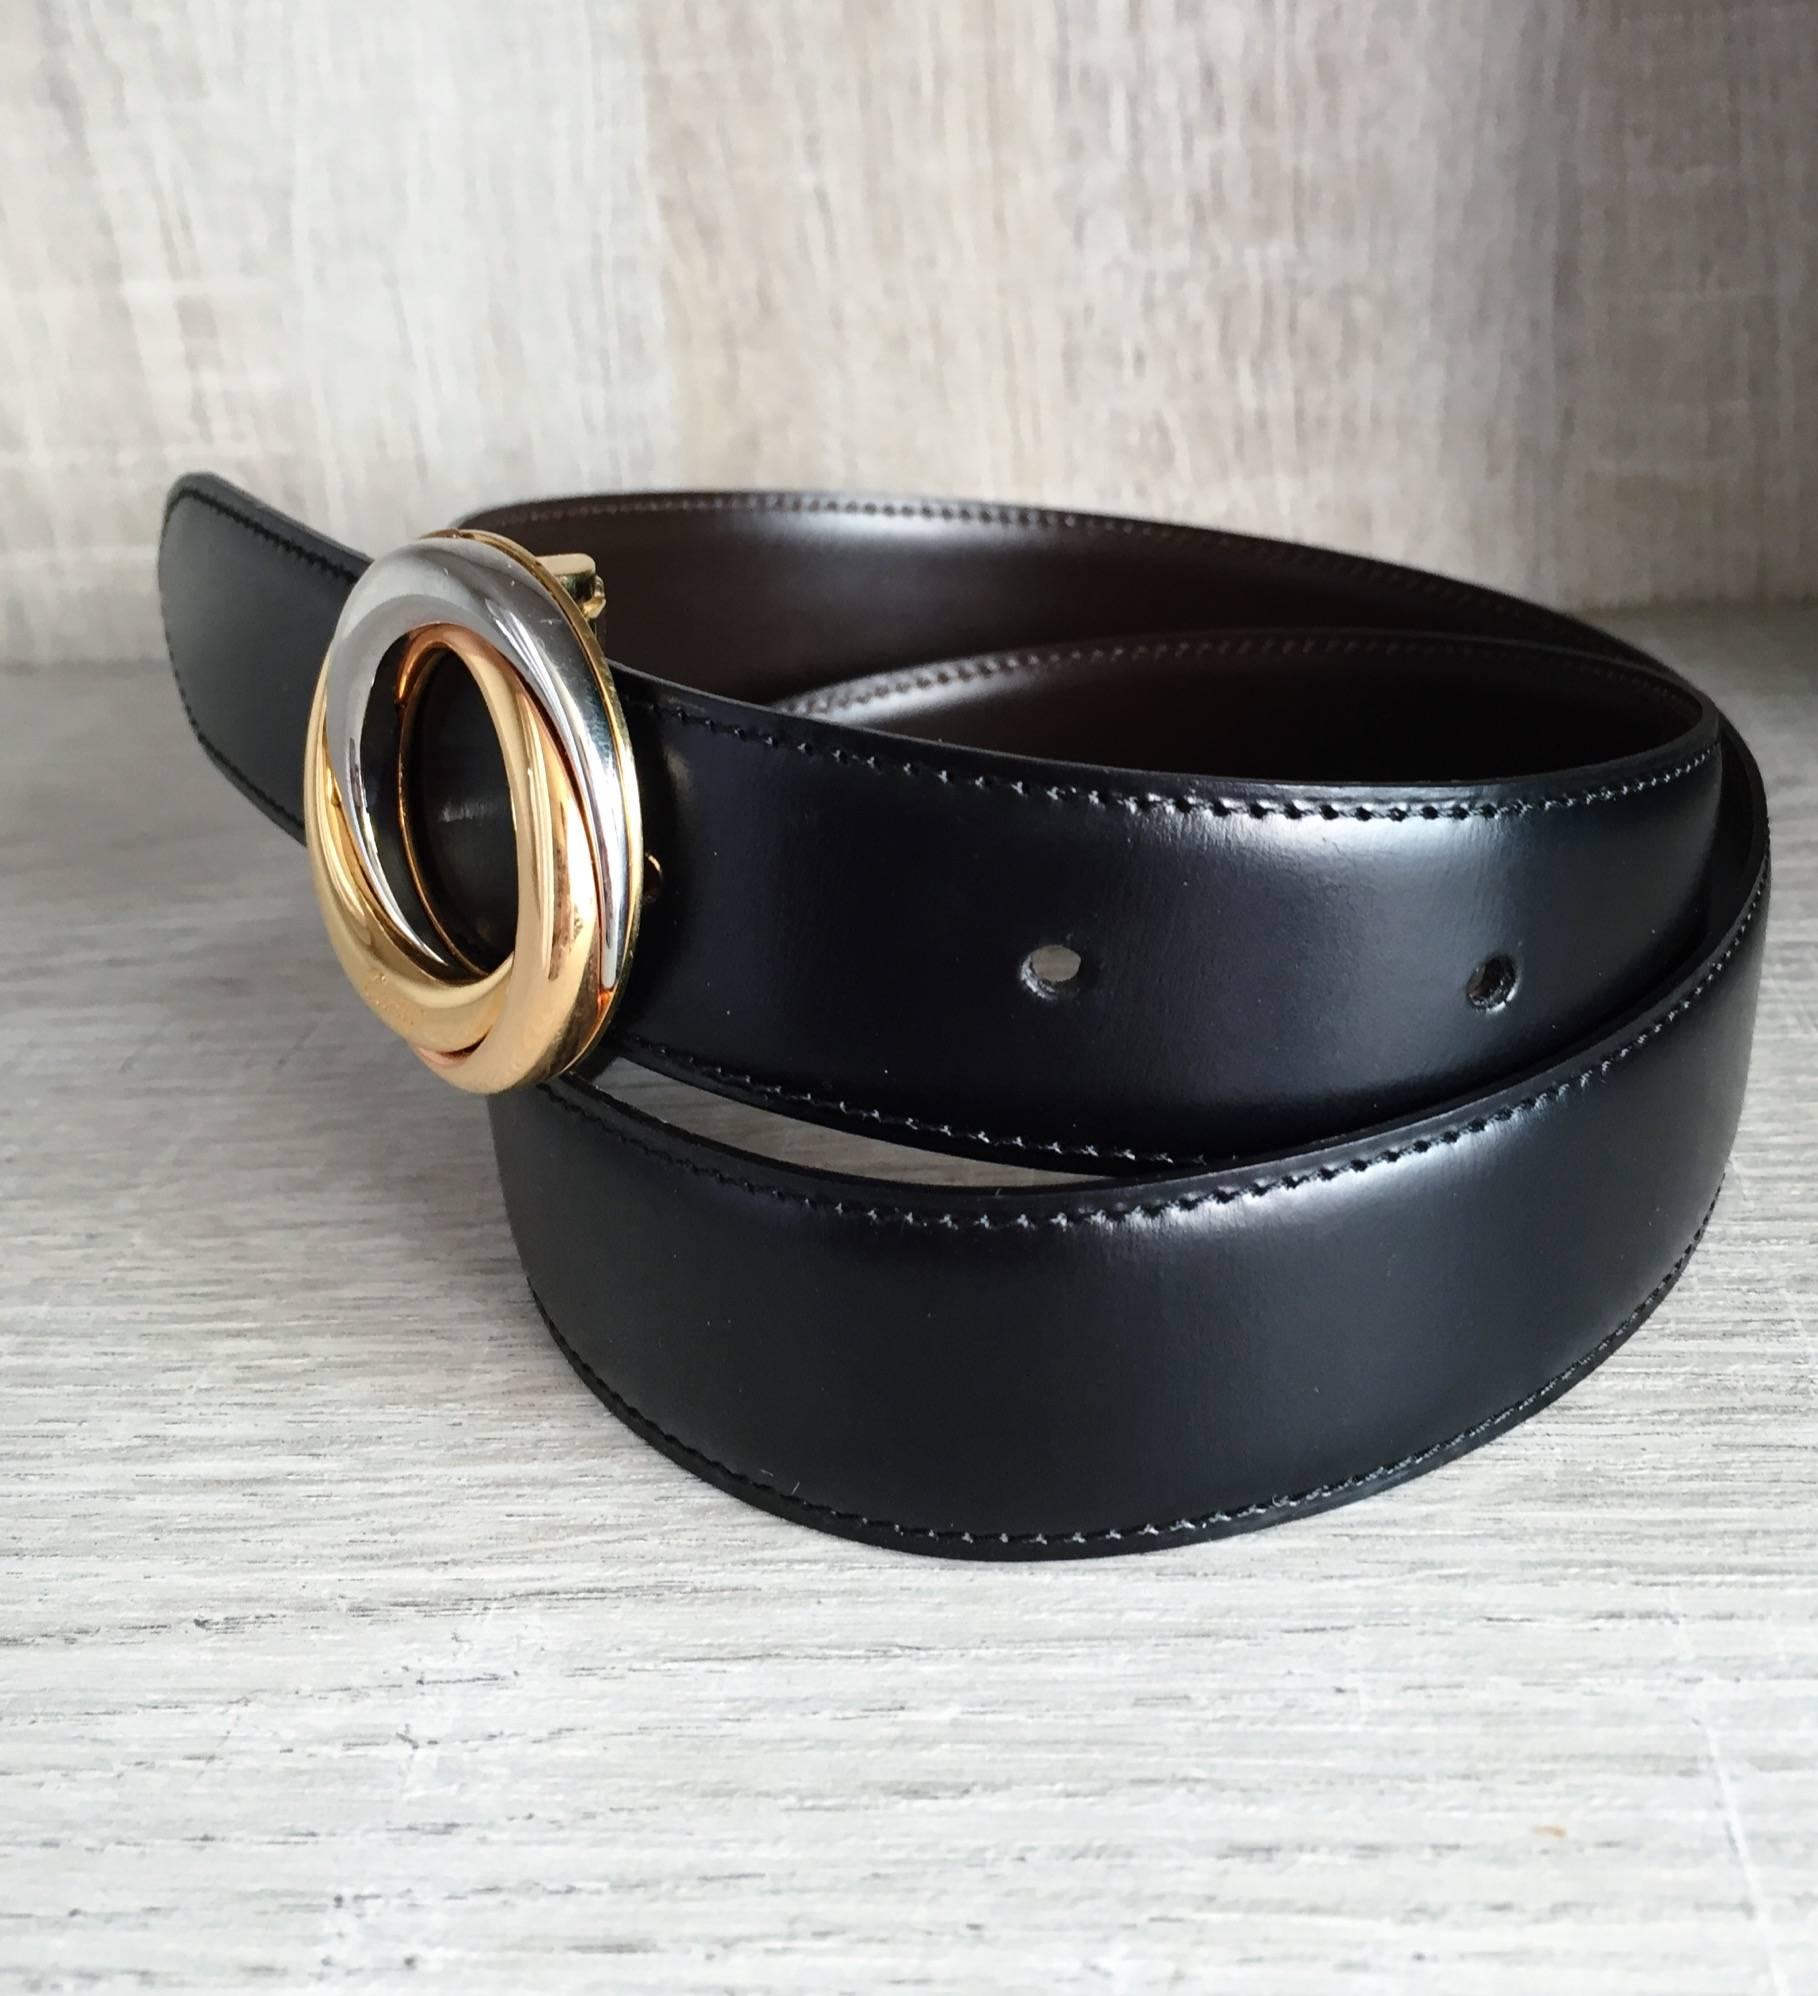 Amazing brand new Cartier belt! Reversible, with brown on one side, and black on the other. Signed Cartier buckle, with two-tone silver and gold. Signed on the front and back of the buckle, and on the leather belt. Can be worn by both a man, or